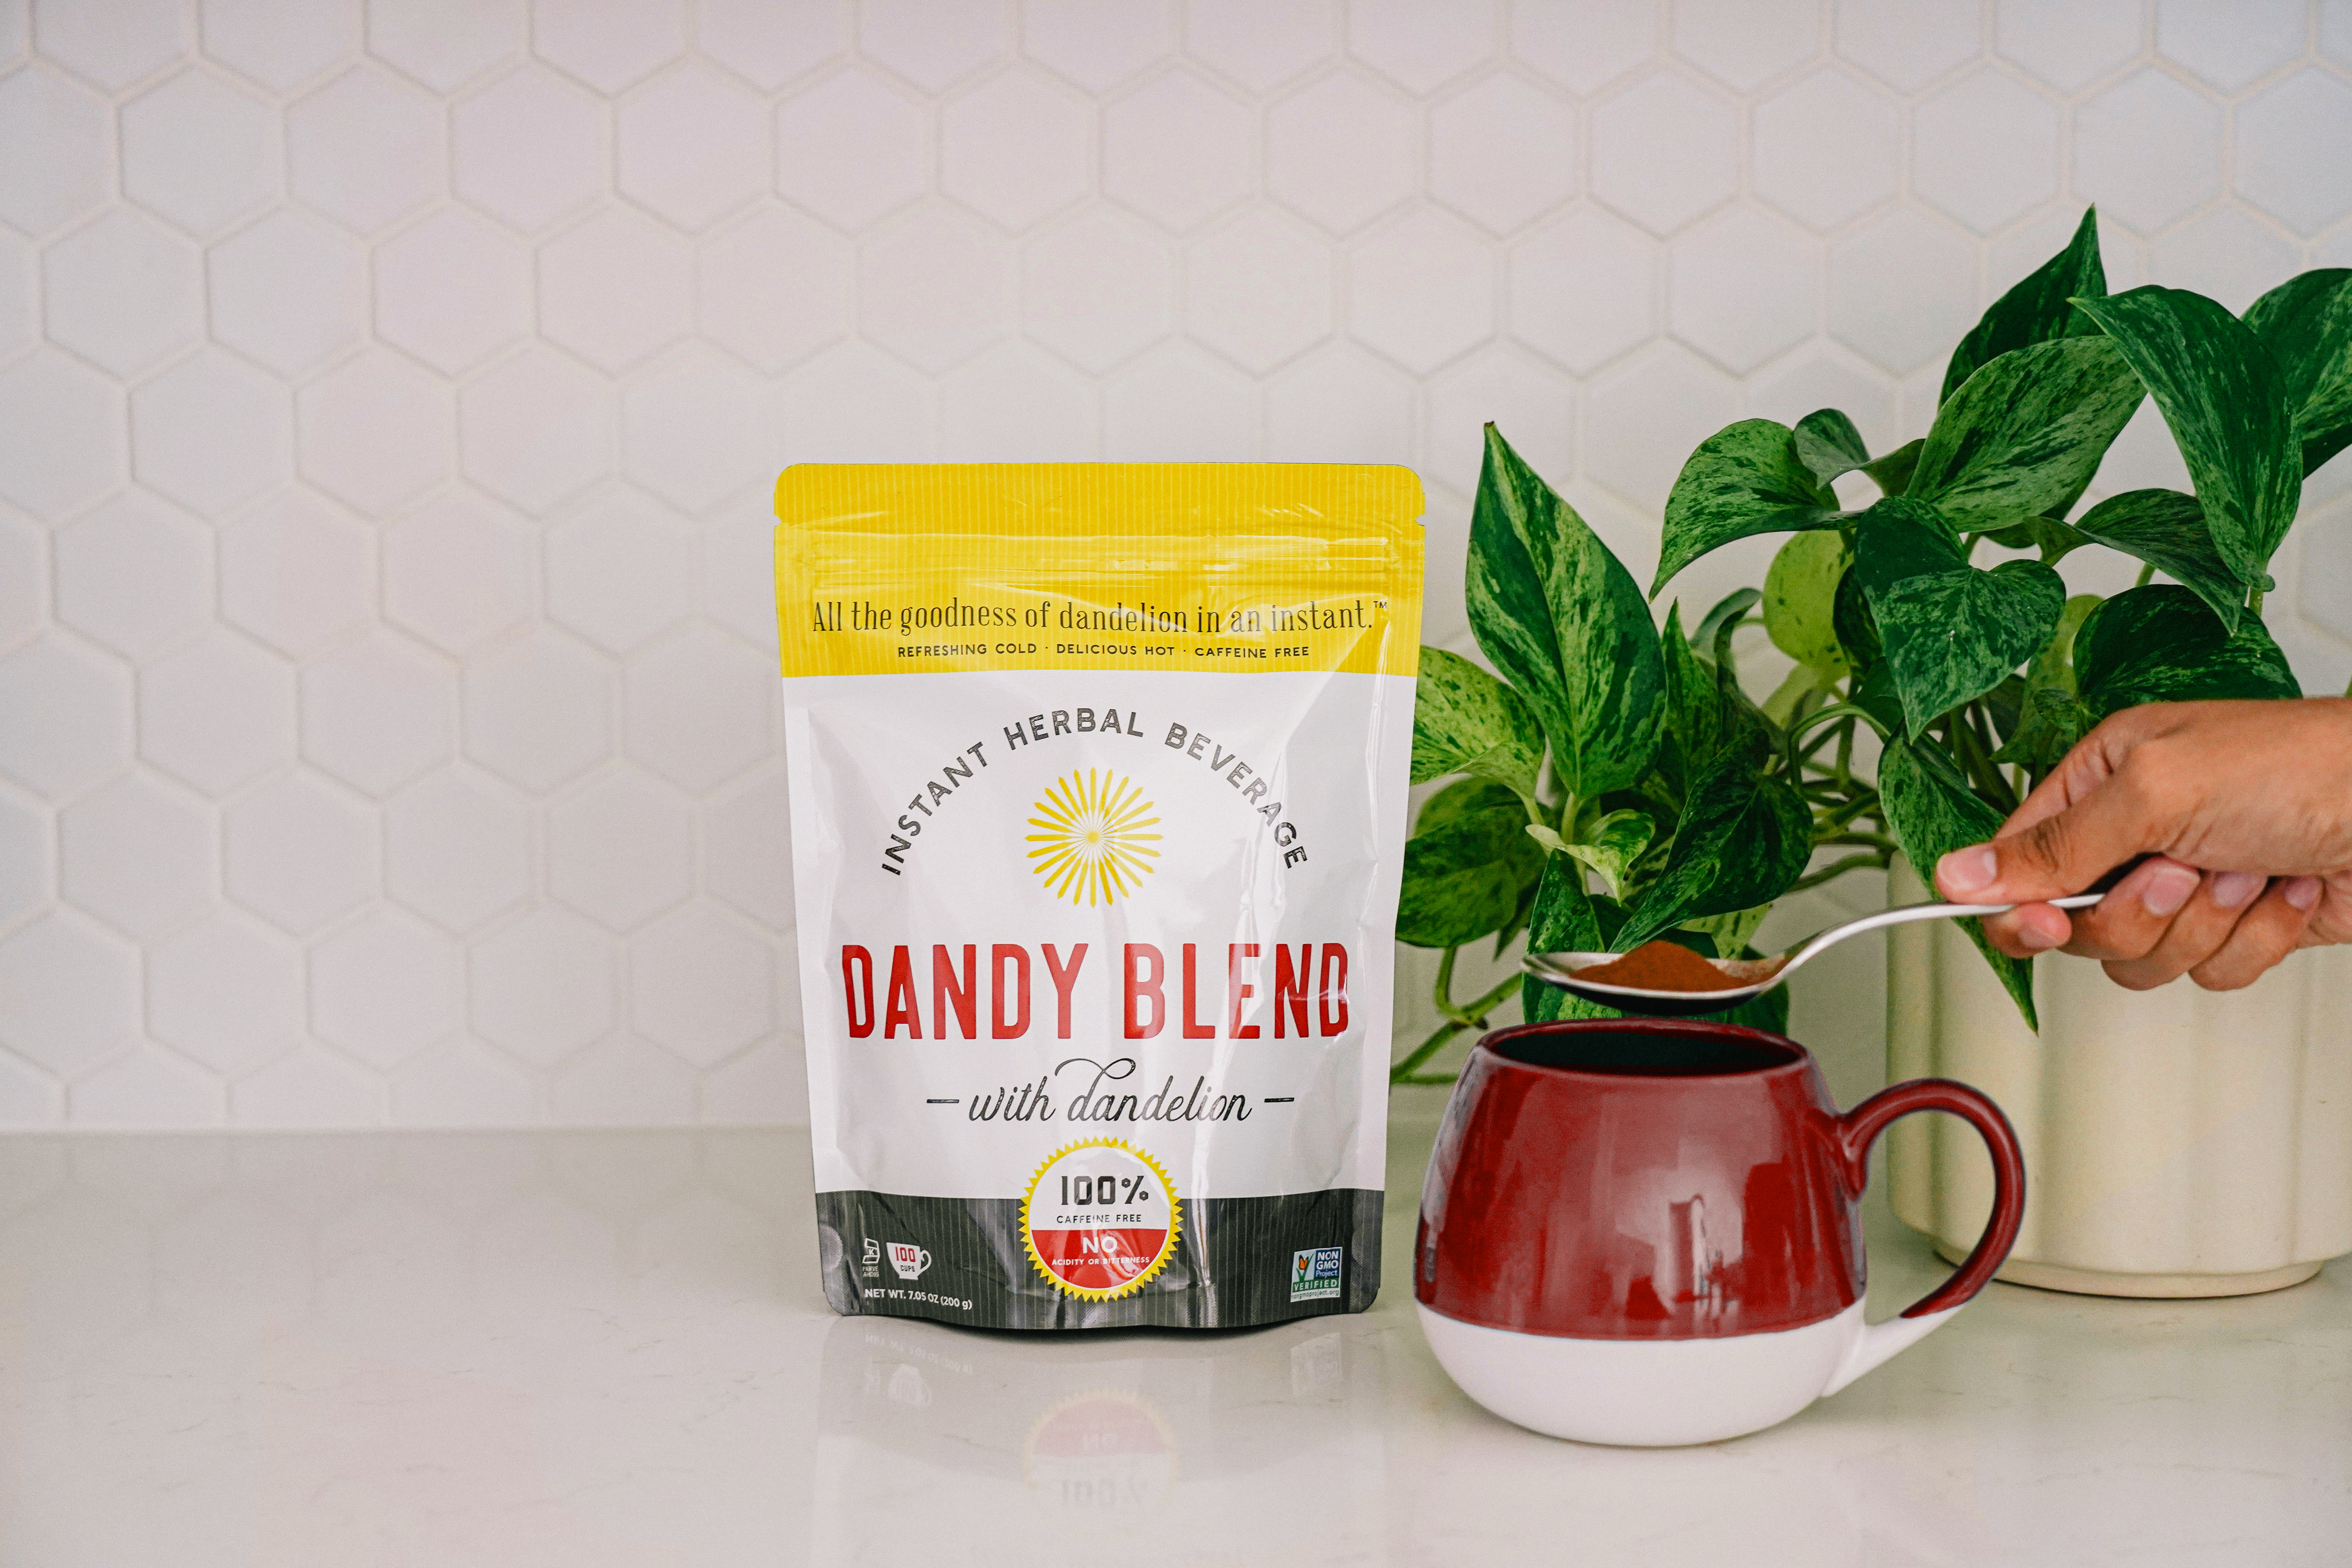 Bag of Dandyblend next to a cup